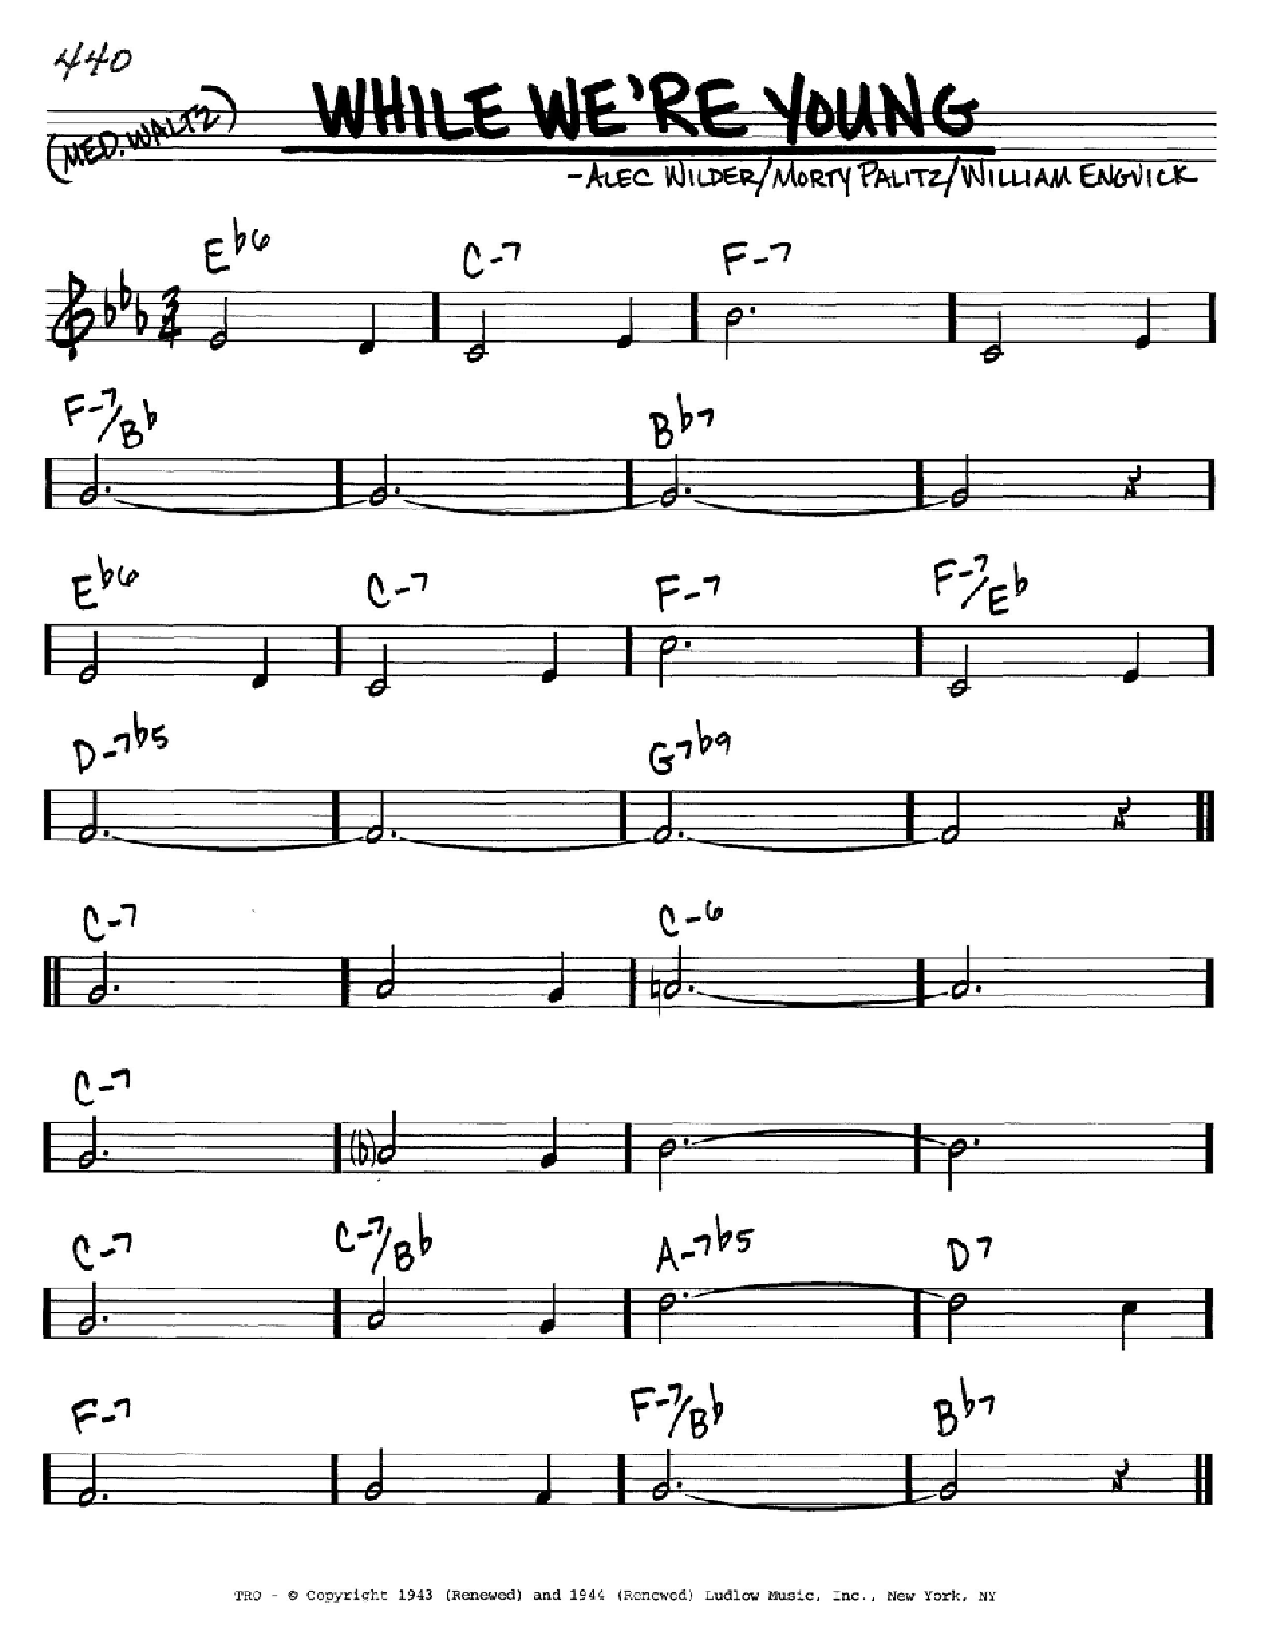 Download Alec Wilder While We're Young Sheet Music